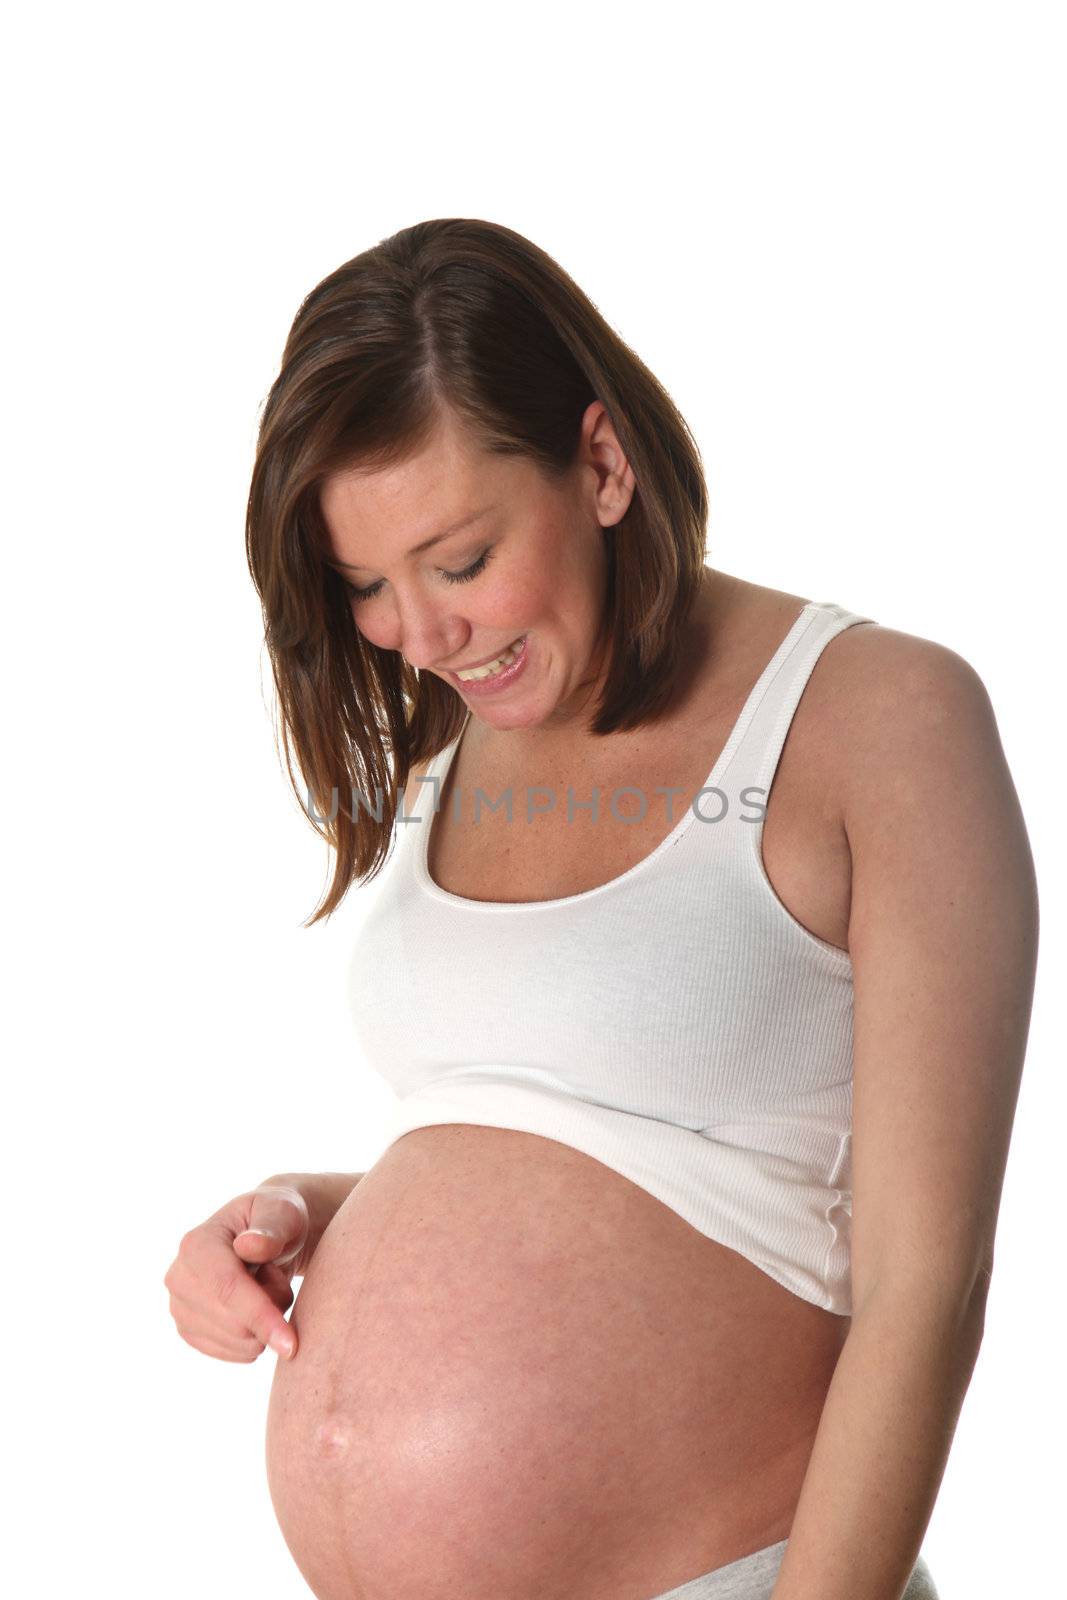 Pregnant woman shows her belly on - is the side - in front of white background
